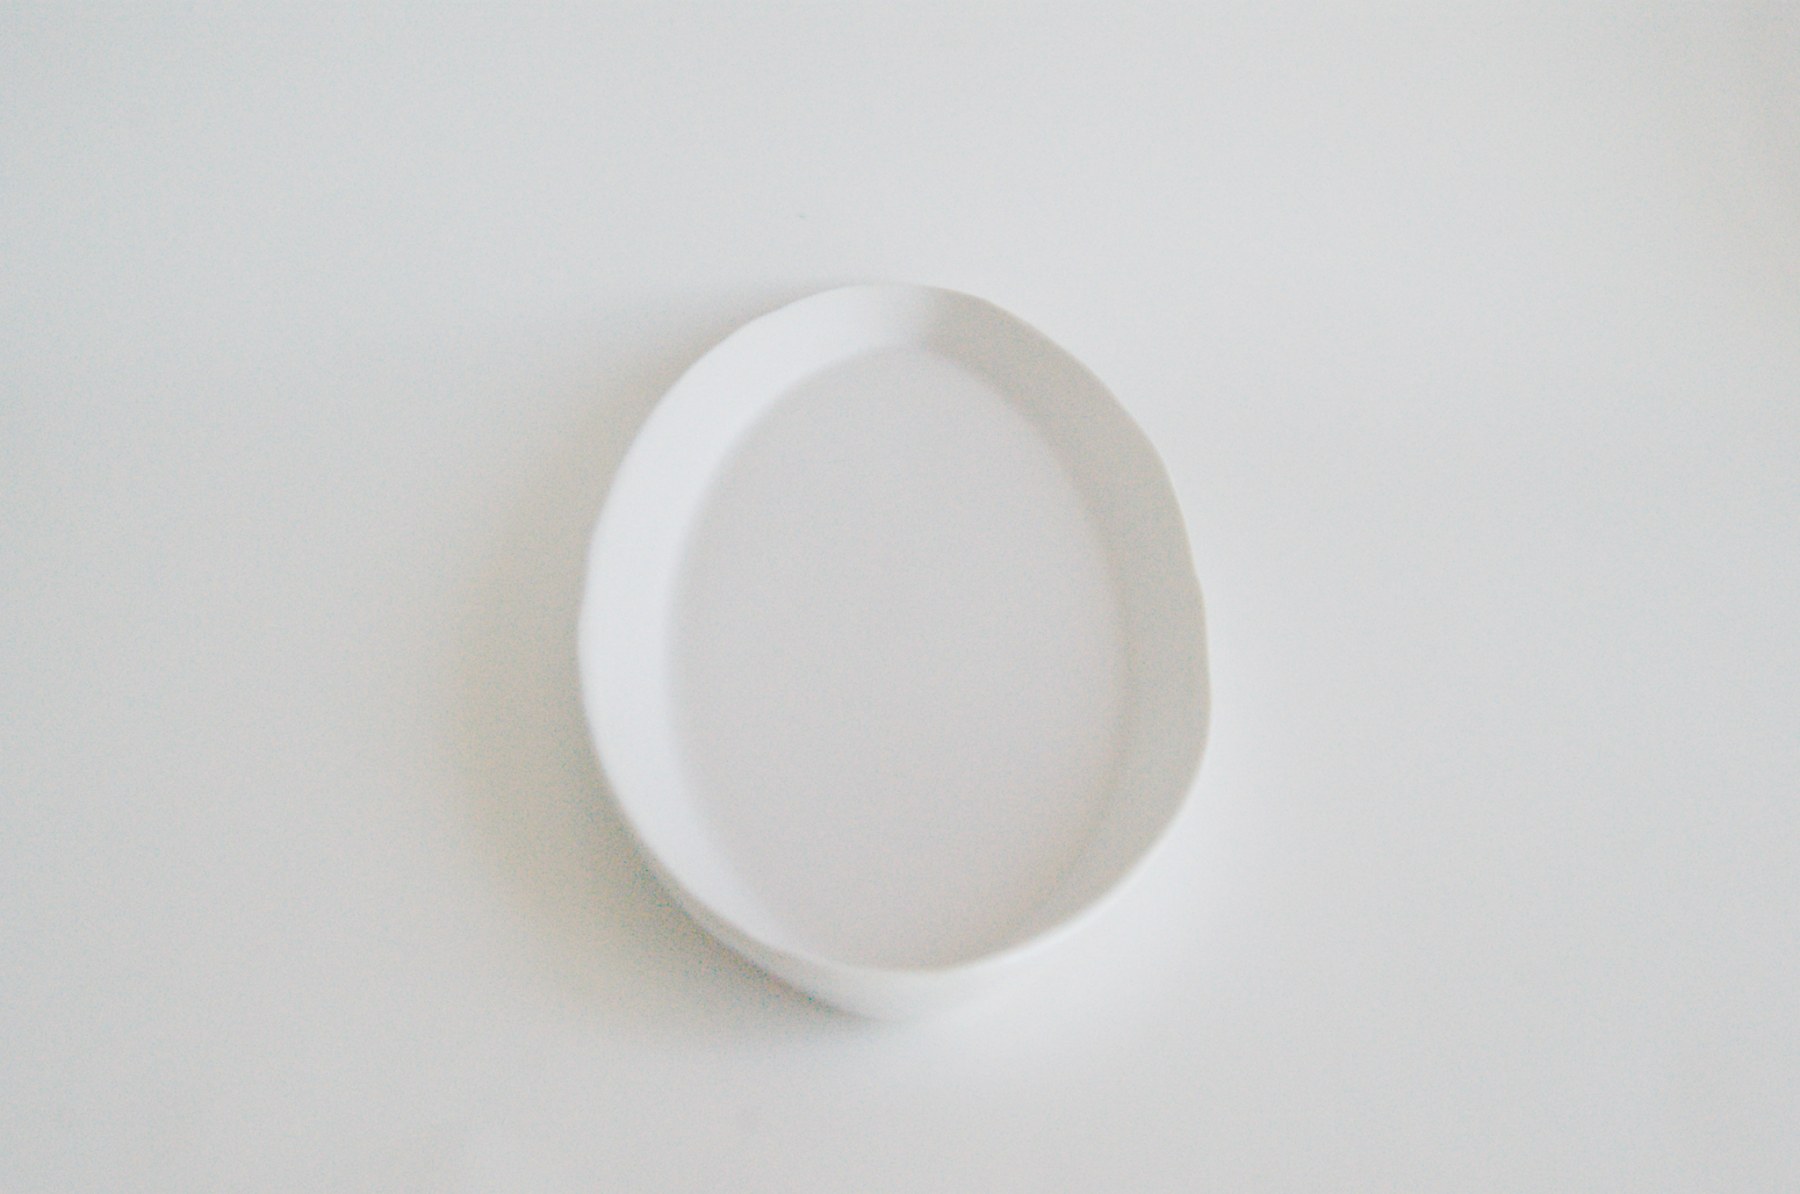 Small Serving Tray - White